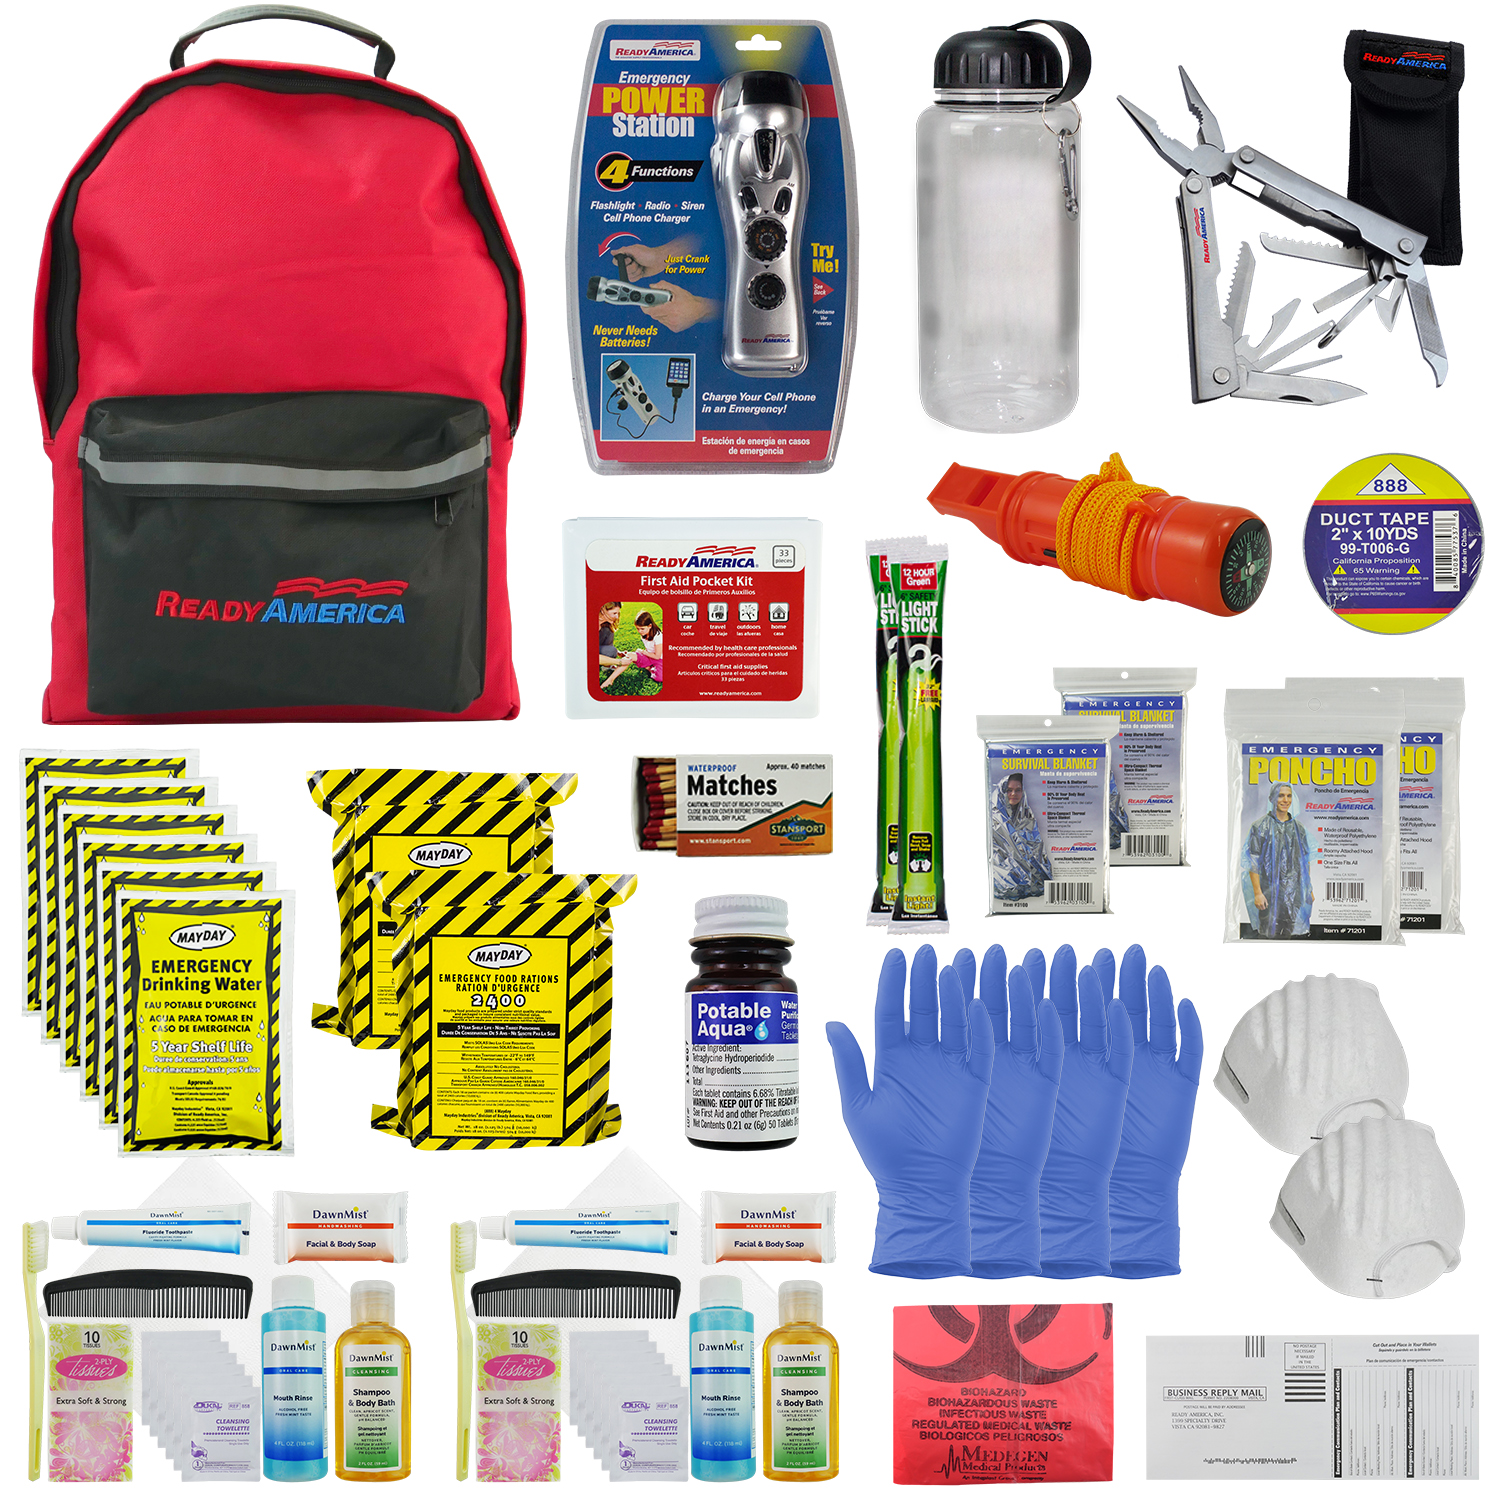 2 Person Deluxe Emergency Kit (3 Day Backpack)